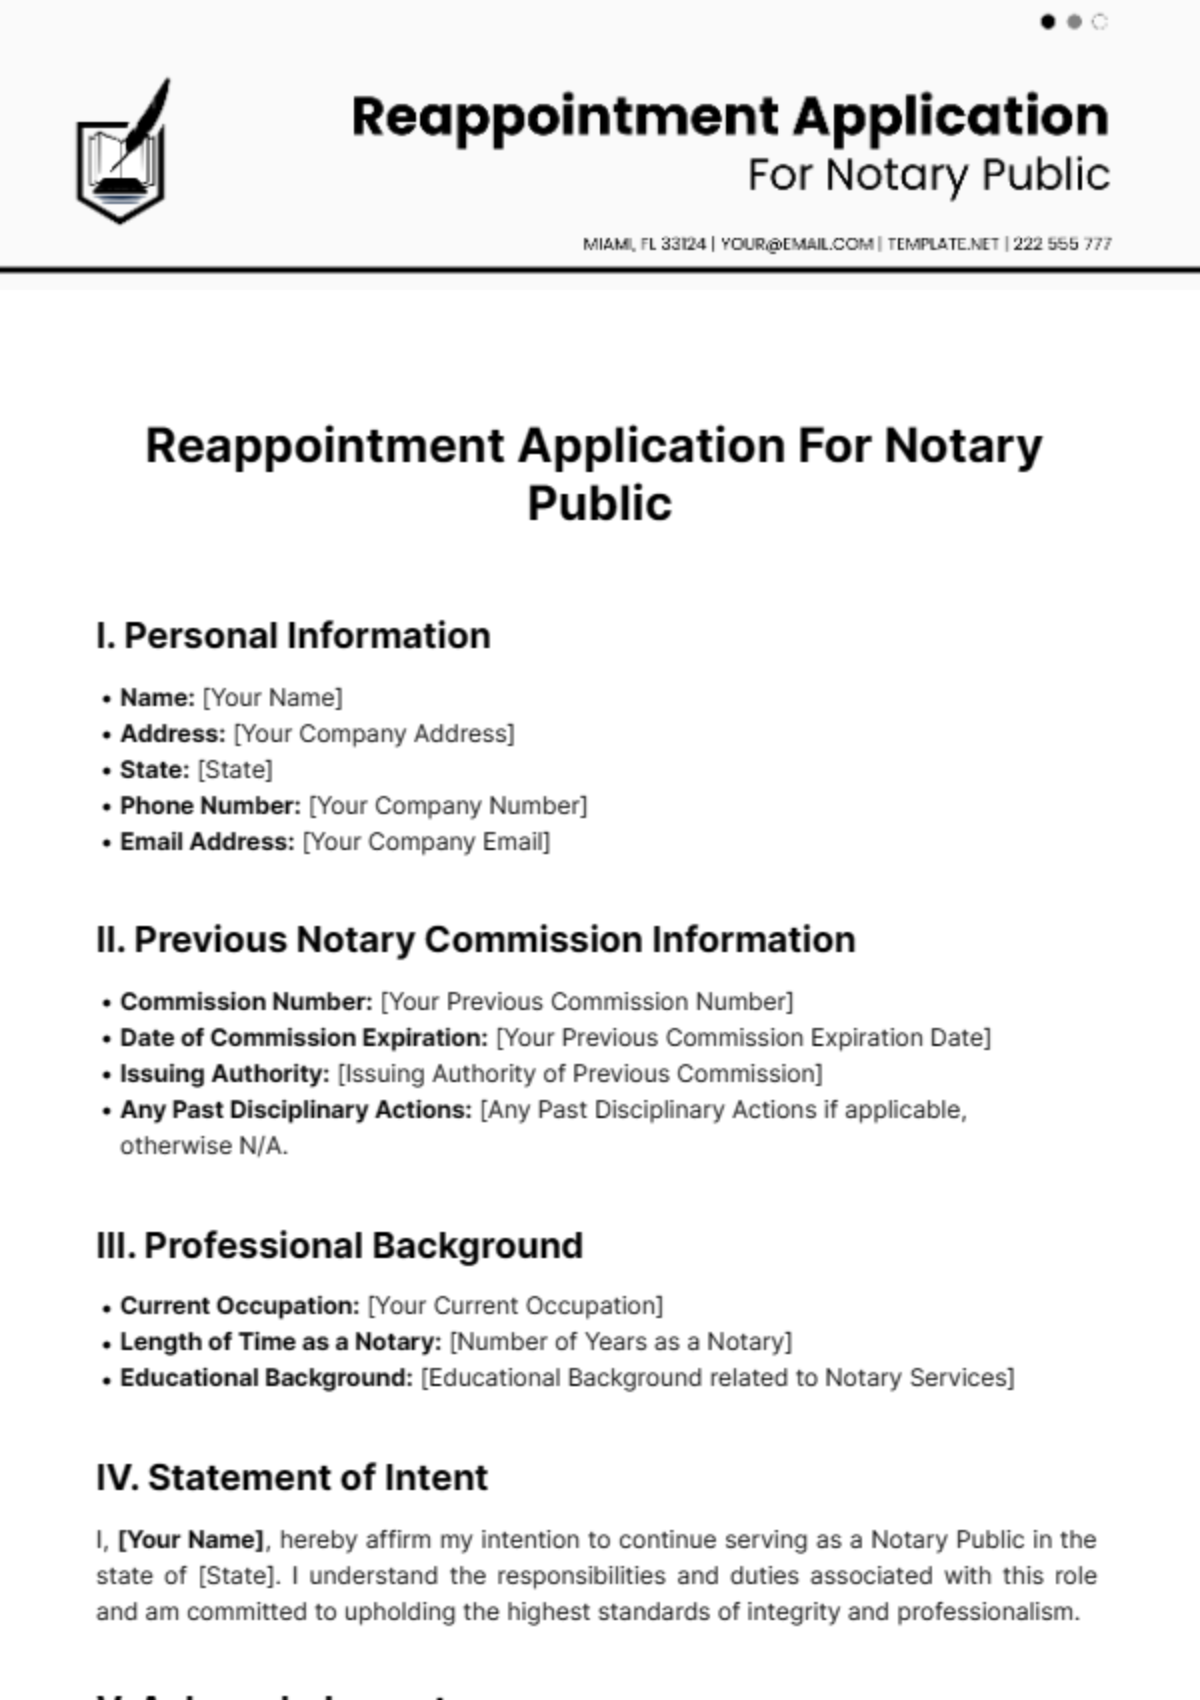 Free Reappointment Application For Notary Public Template